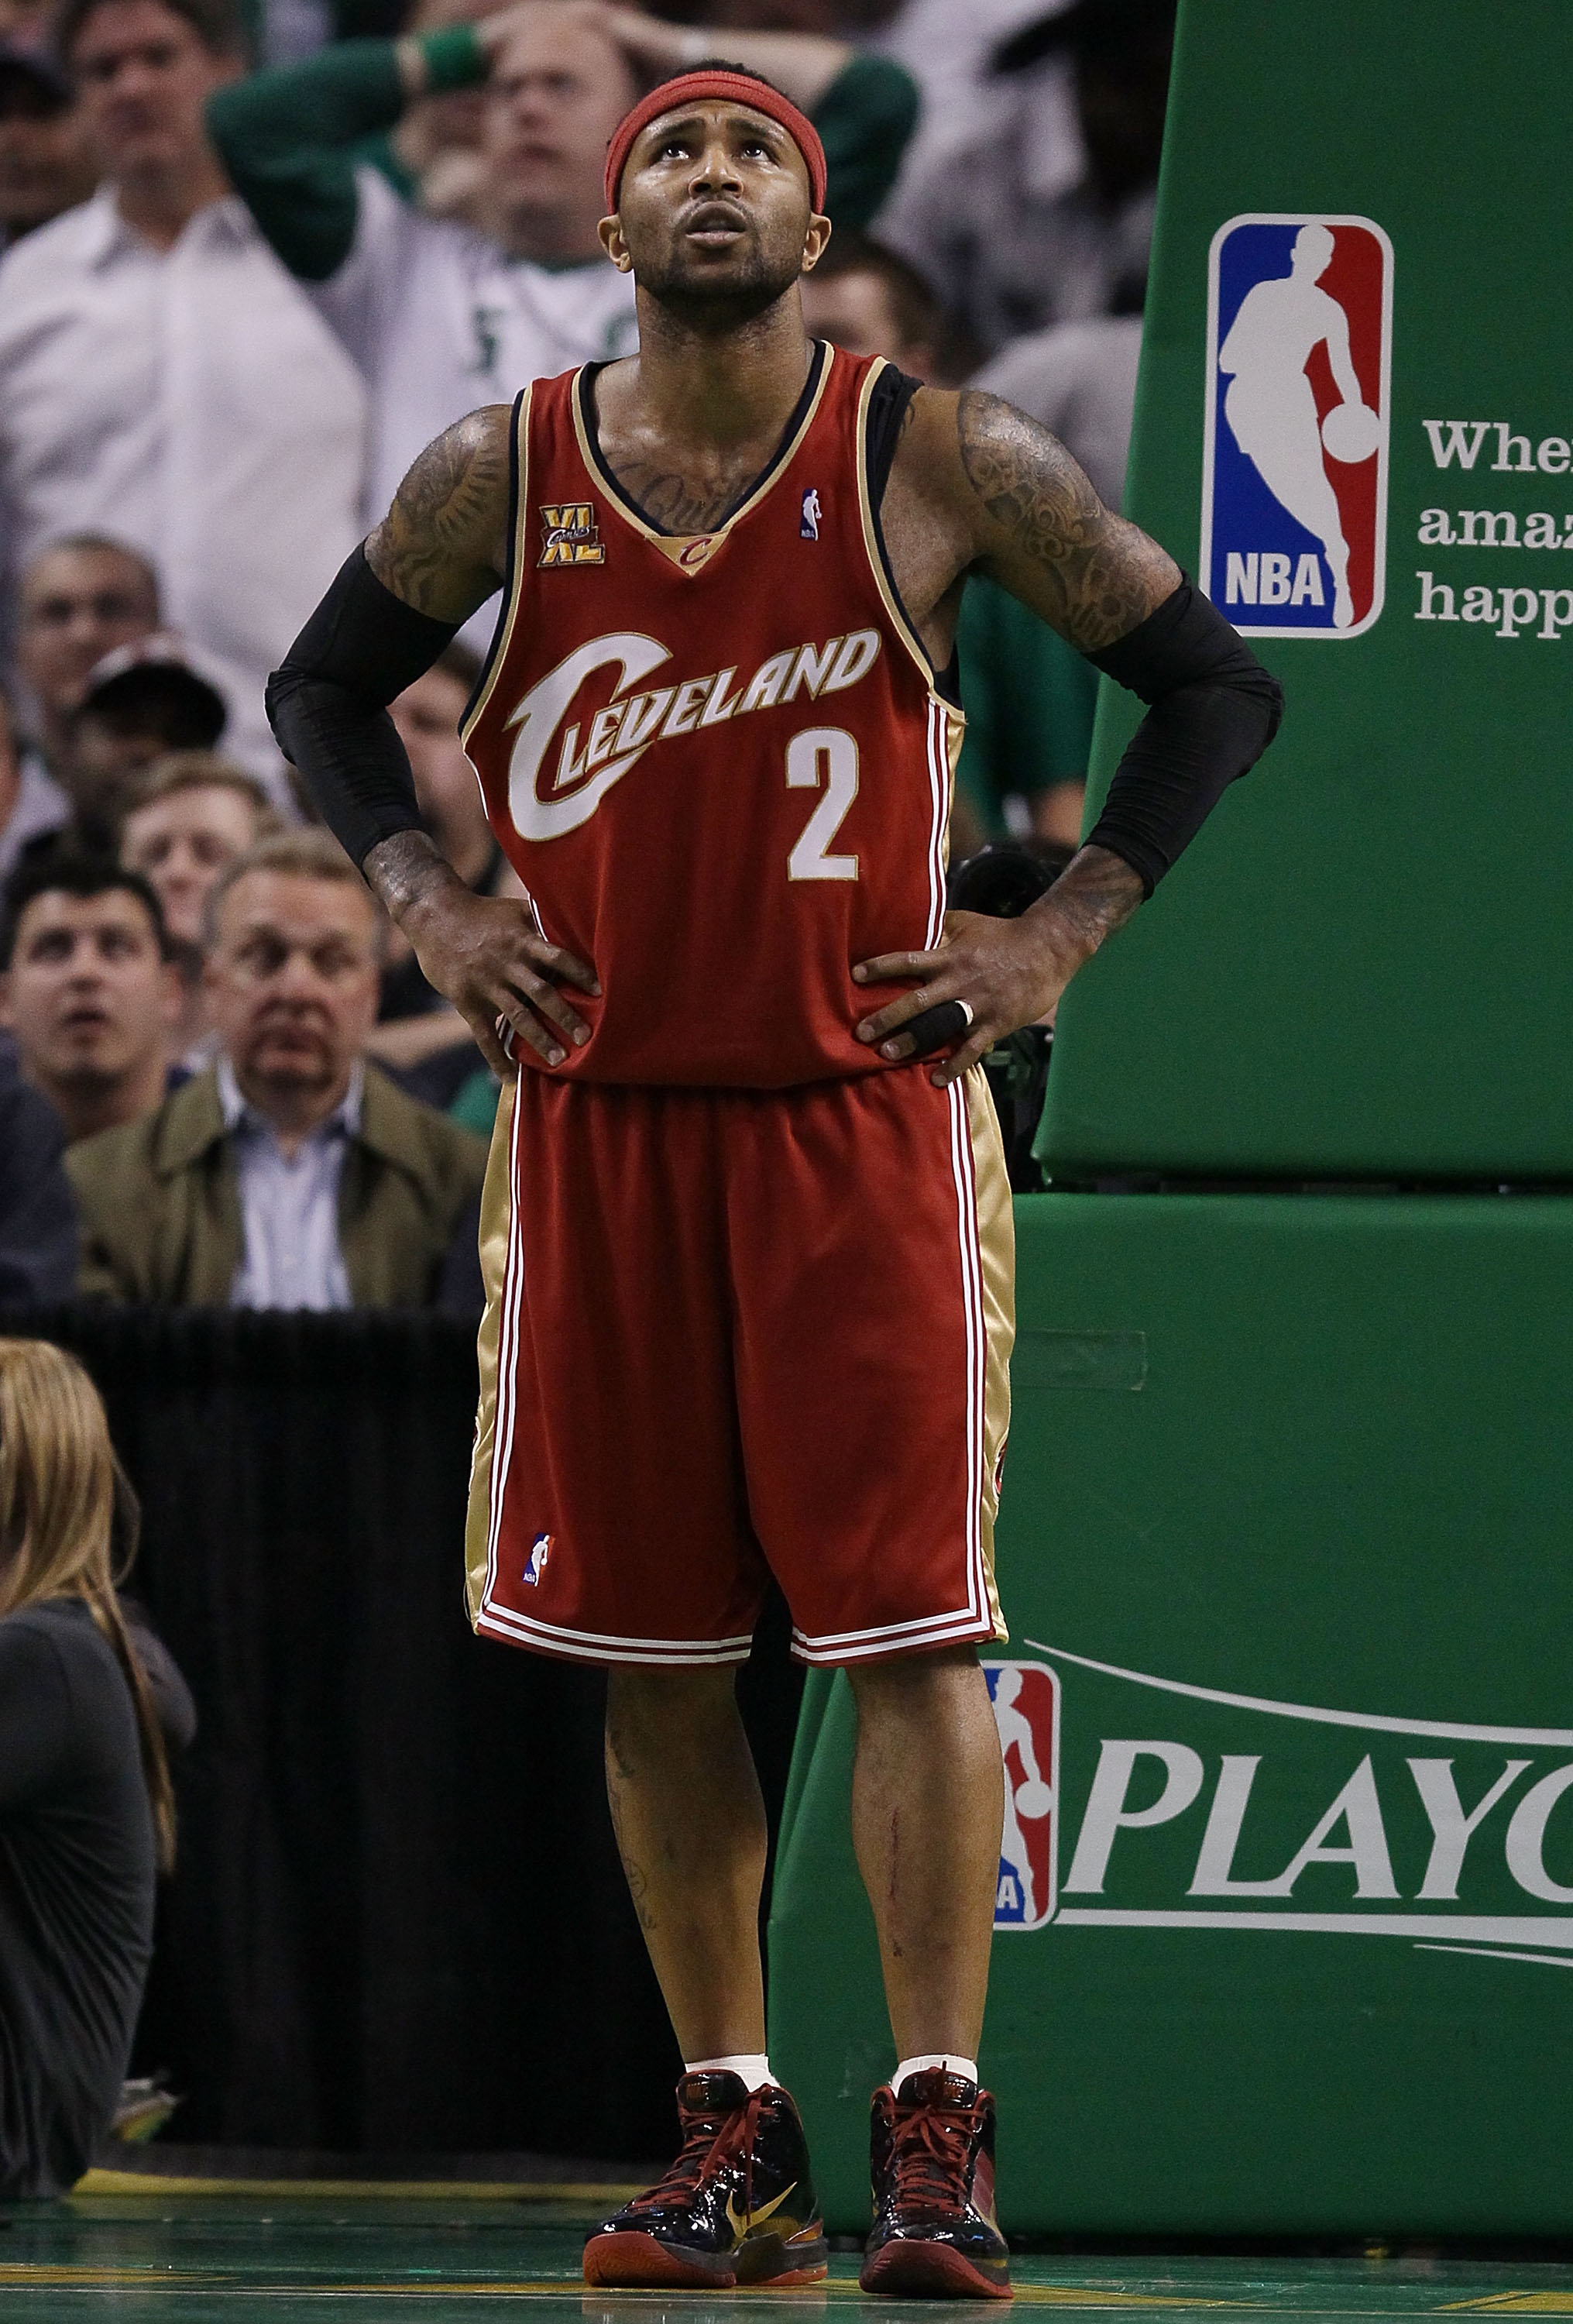 BOSTON - MAY 13:  Mo Williams #2 of the Cleveland Cavaliers reacts after he is called for a foul in the fourth quarter against the Boston Celtics during Game Six of the Eastern Conference Semifinals of the 2010 NBA playoffs at TD Garden on May 13, 2010 in